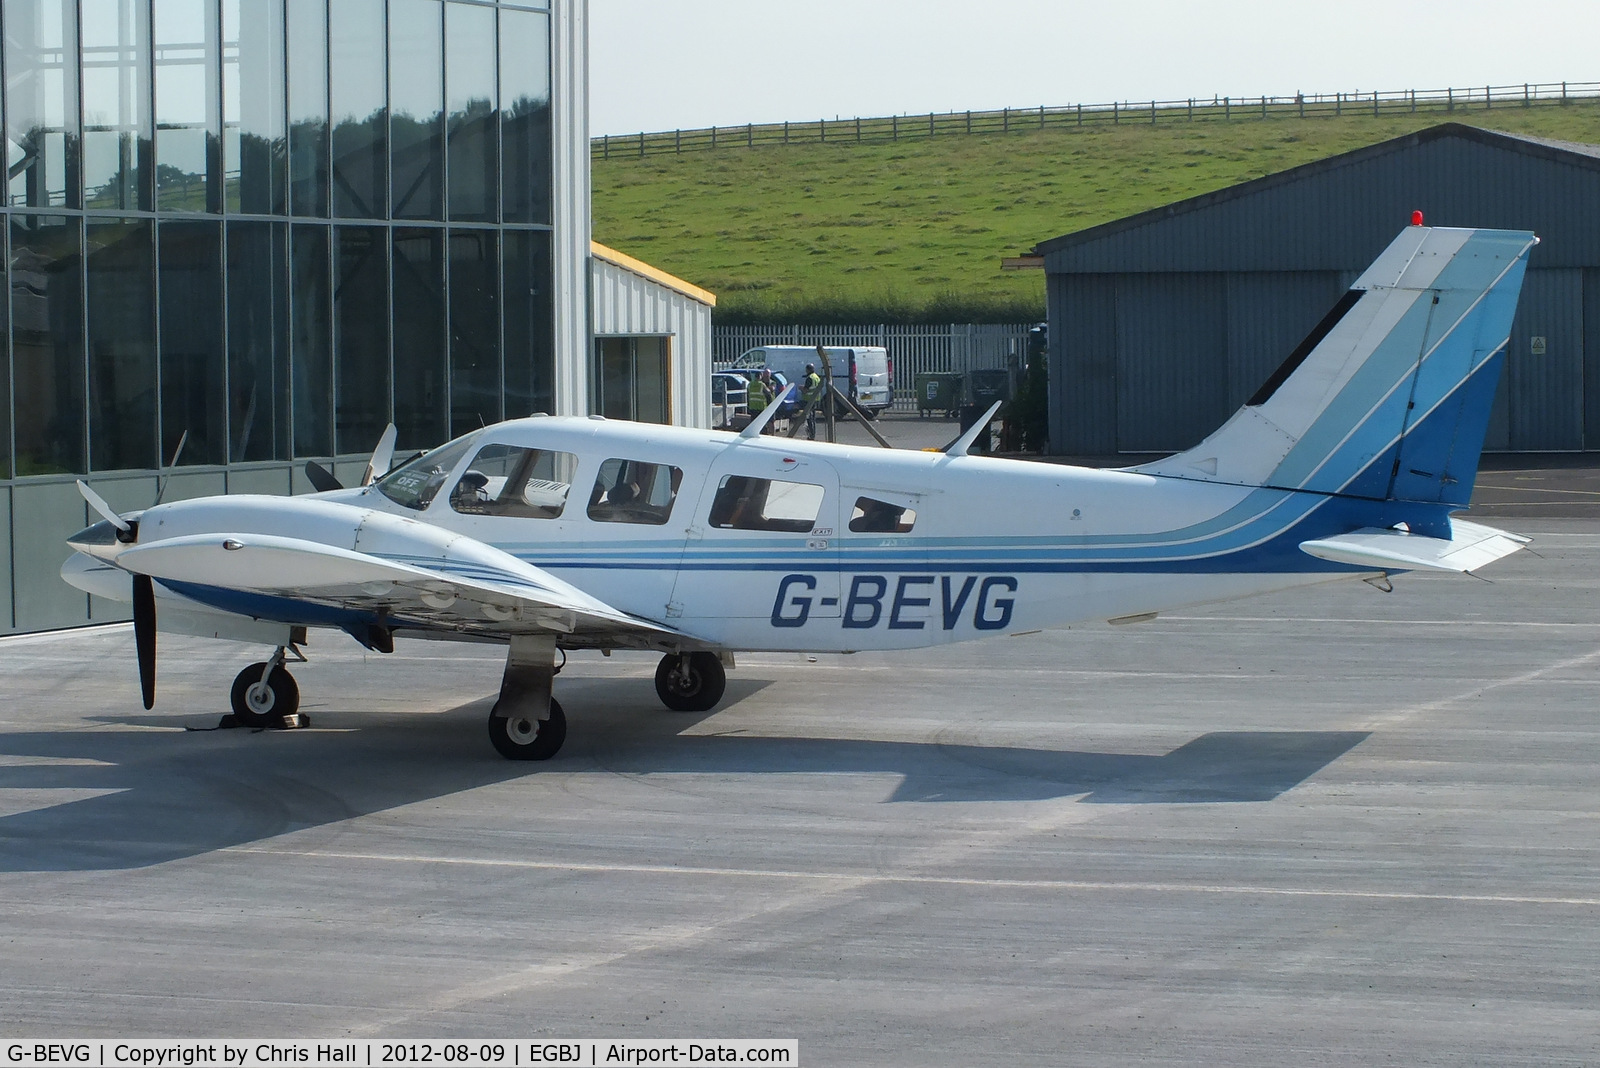 G-BEVG, 1975 Piper PA-34-200T Seneca II C/N 34-7570060, I last saw this in a sorry state in the 